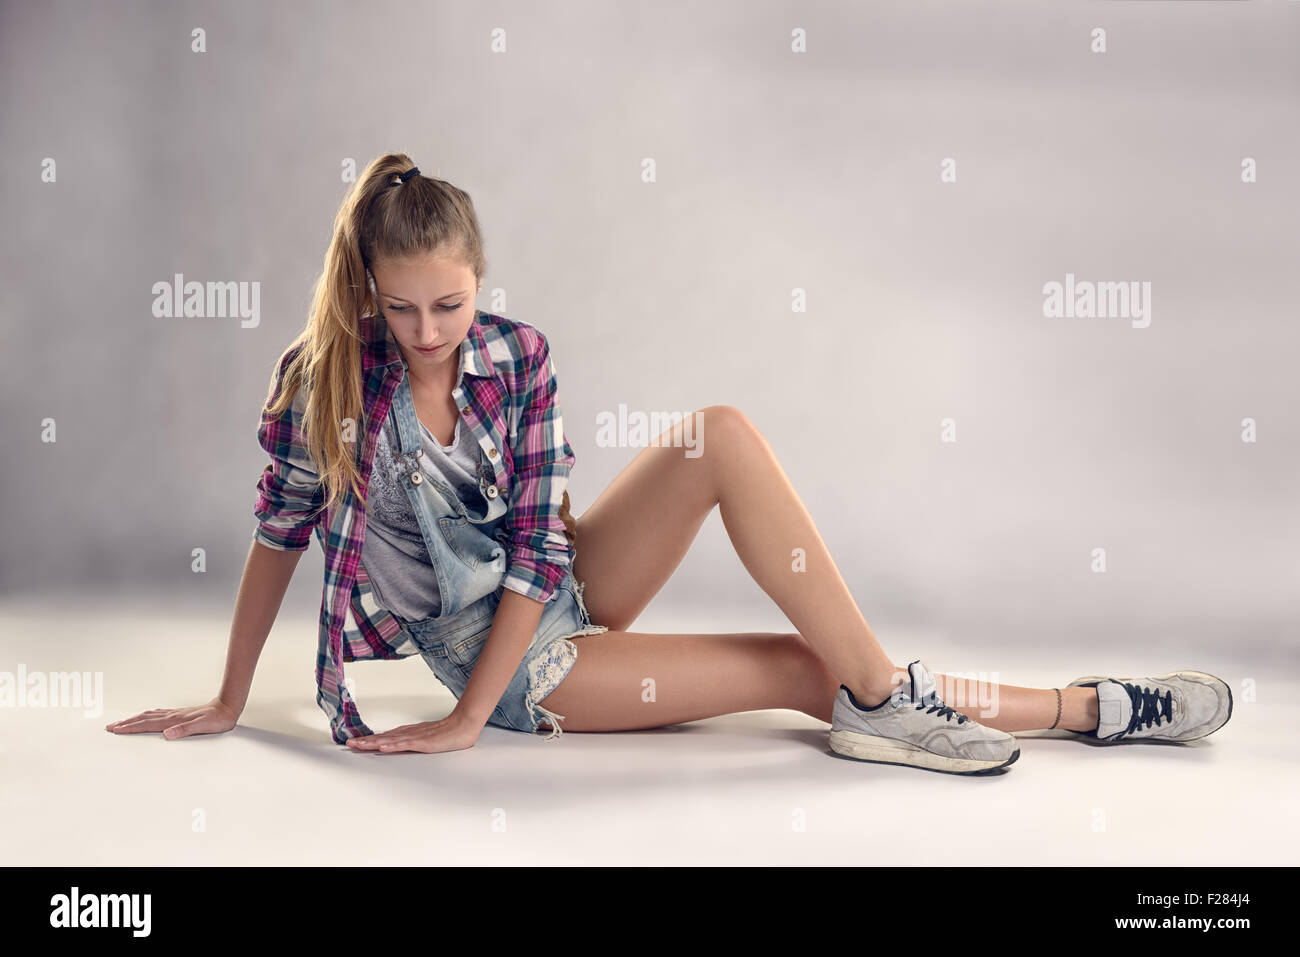 Stylish Young Modern Female Dancer Sitting on the Floor, with a Thoughtful Facial Expression, Against Gray Wall Background. Stock Photo